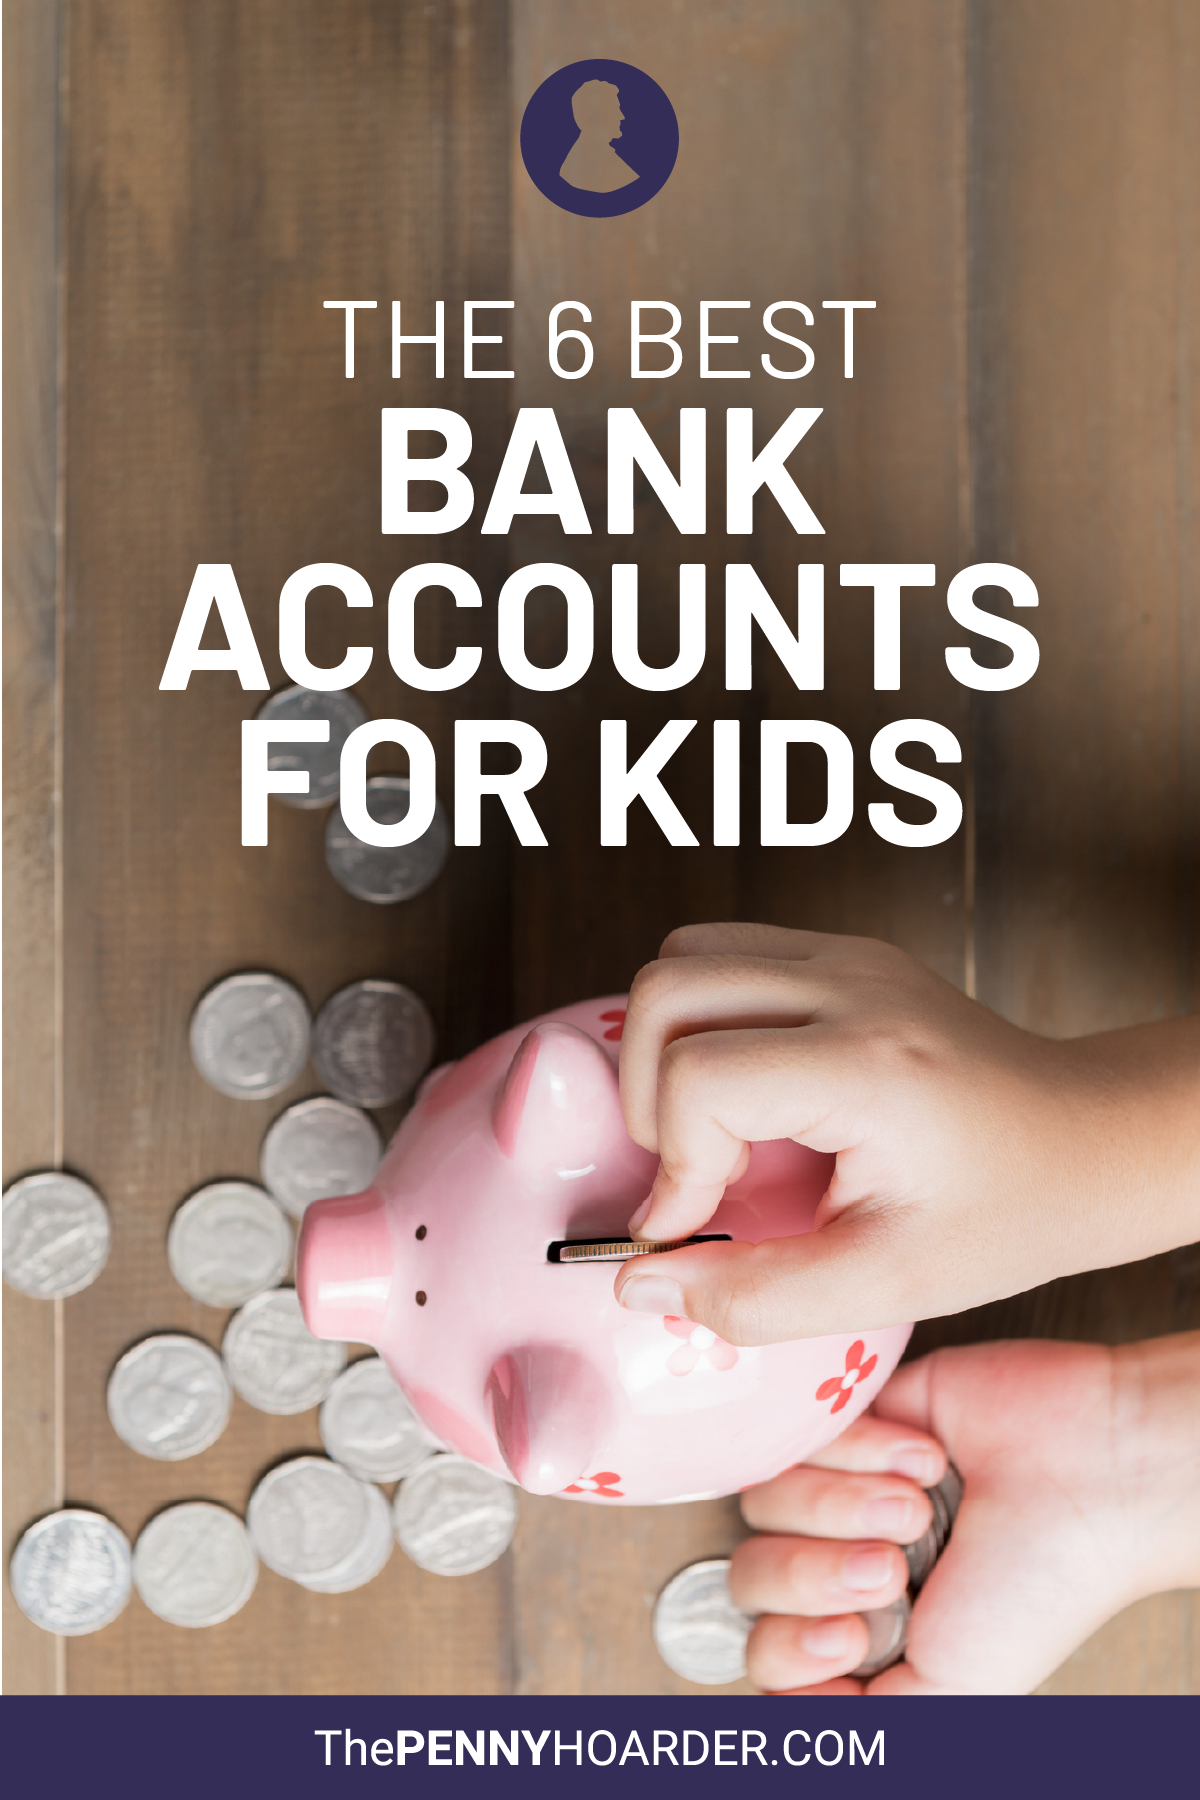 The 6 Best Bank Accounts for Kids in 2020